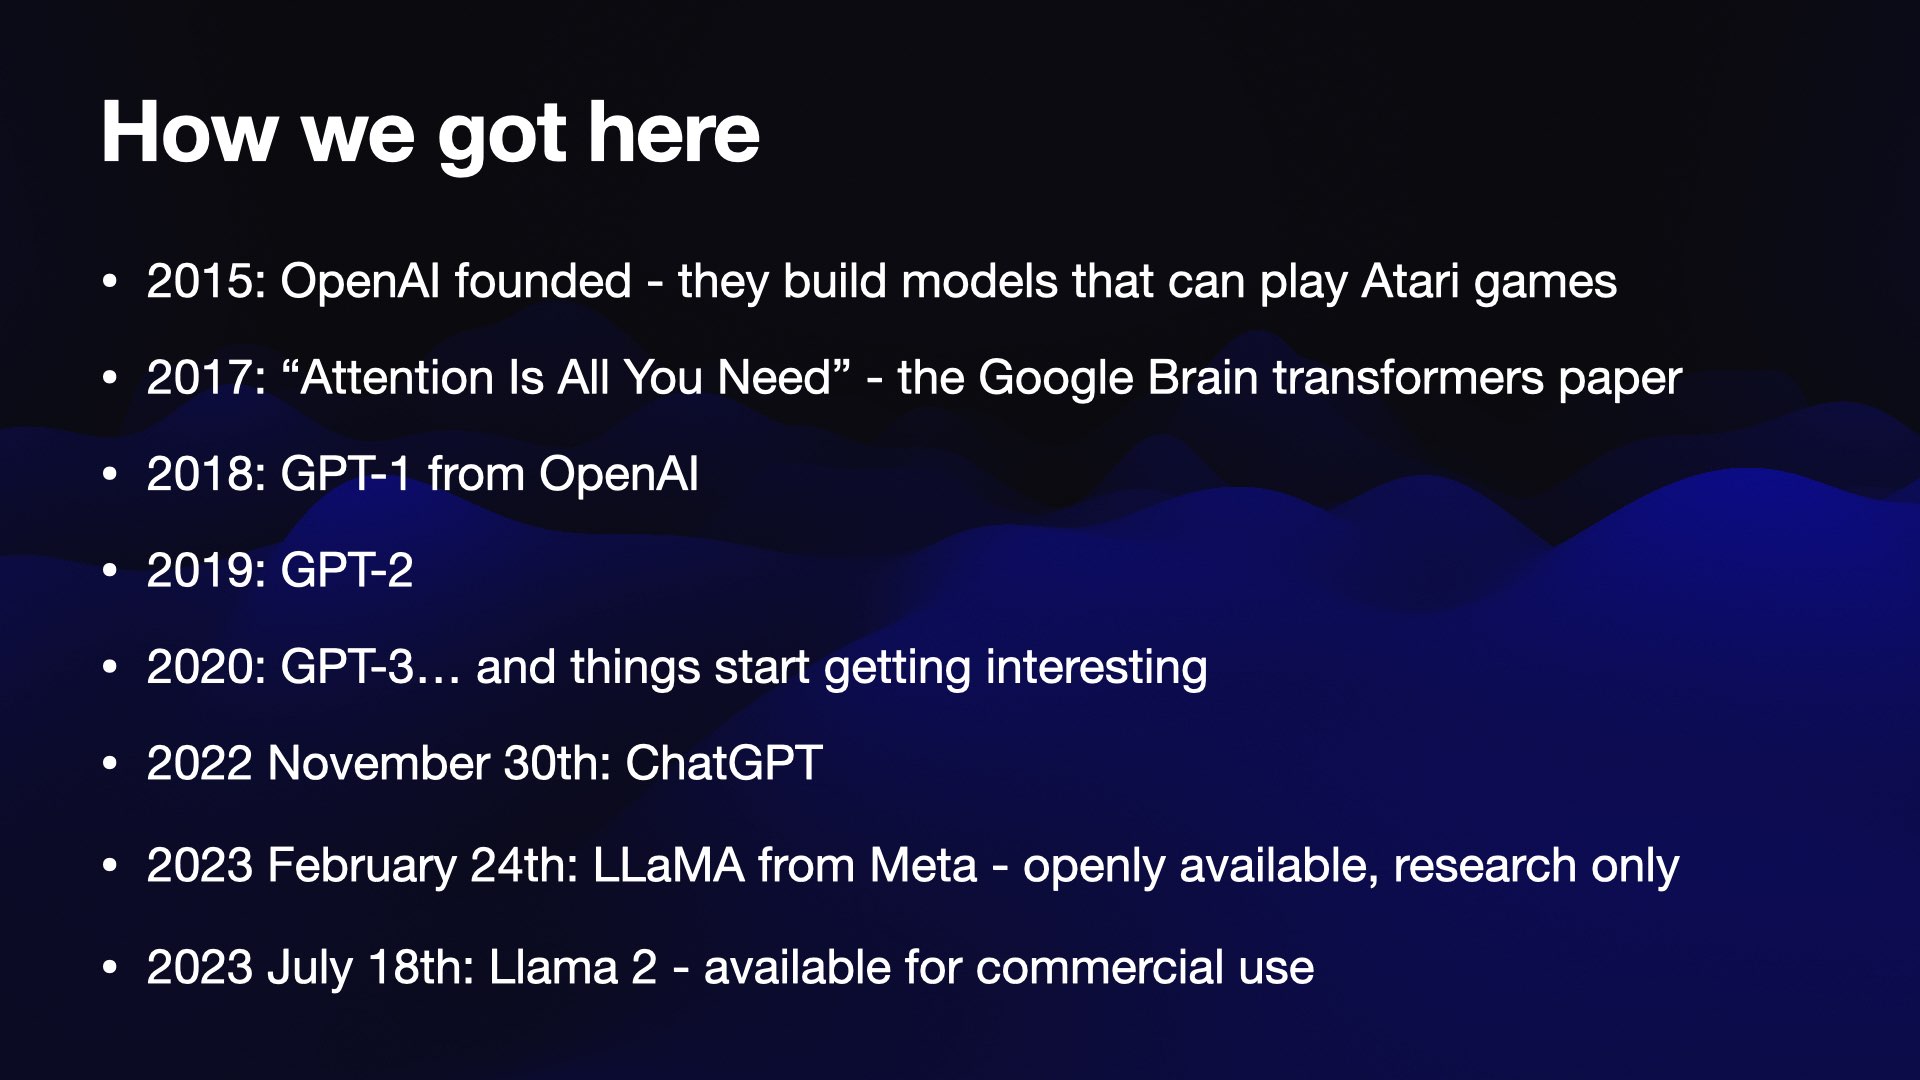 How we got here  2015: OpenAI founded - they build models that can play Atari games 2017: “Attention Is All You Need” - the Google Brain transformers paper 2018: GPT-1 from OpenAI 2019: GPT-2 2020: GPT-3… and things start getting interesting 2022 November 30th: ChatGPT 2023 February 24th: LLaMA from Meta - openly available, research only 2023 July 18th: Llama 2 - available for commercial use